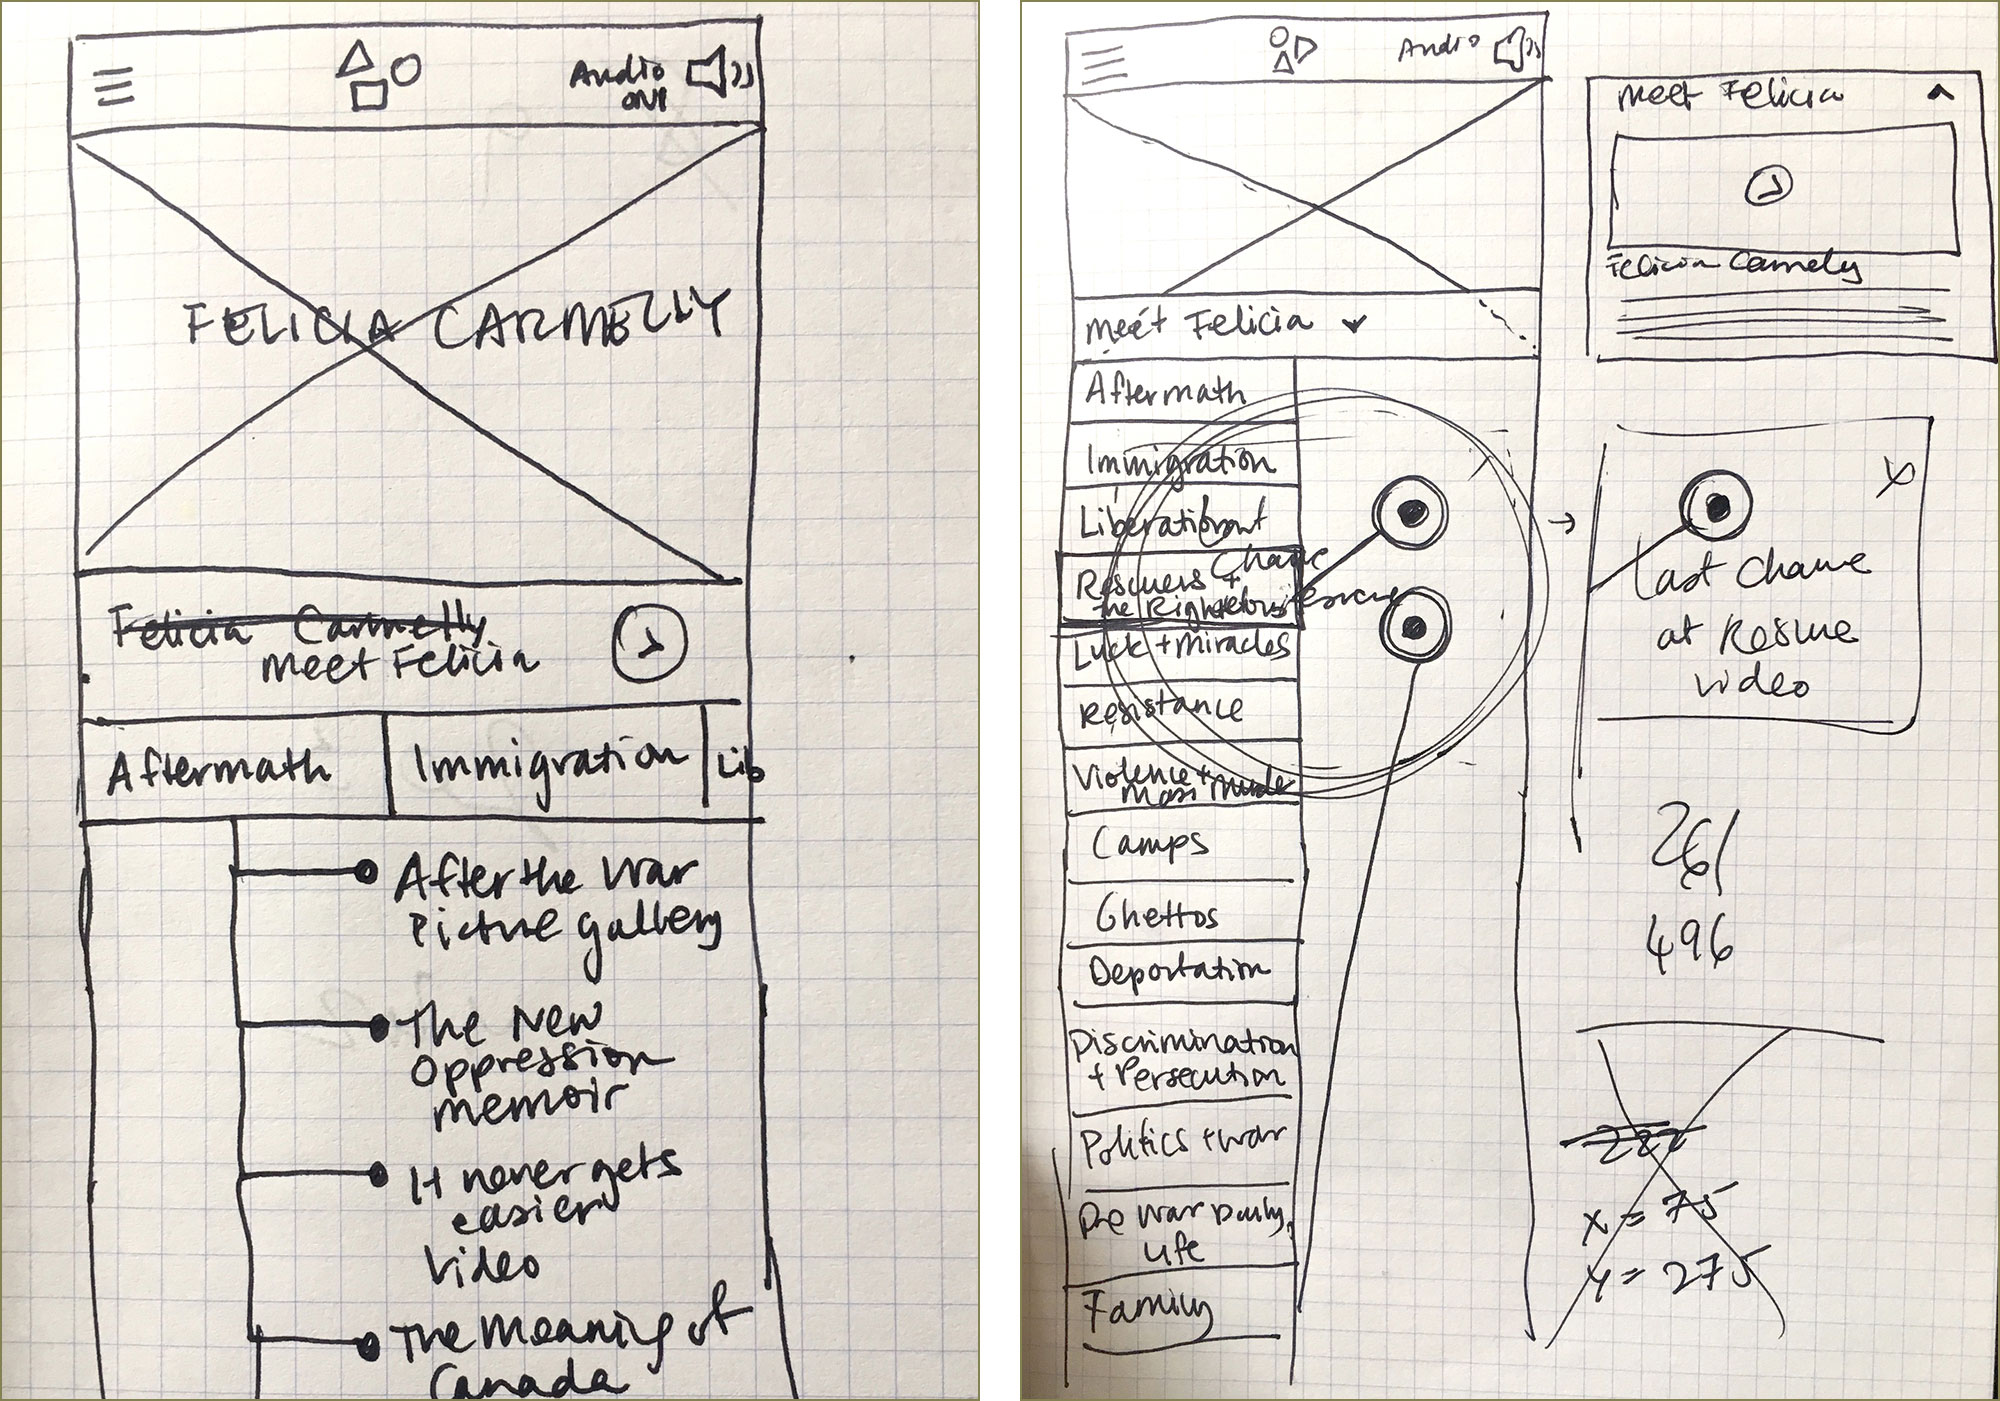 Initial notebook sketches of the Survivor Landing Page for the small screen experience.